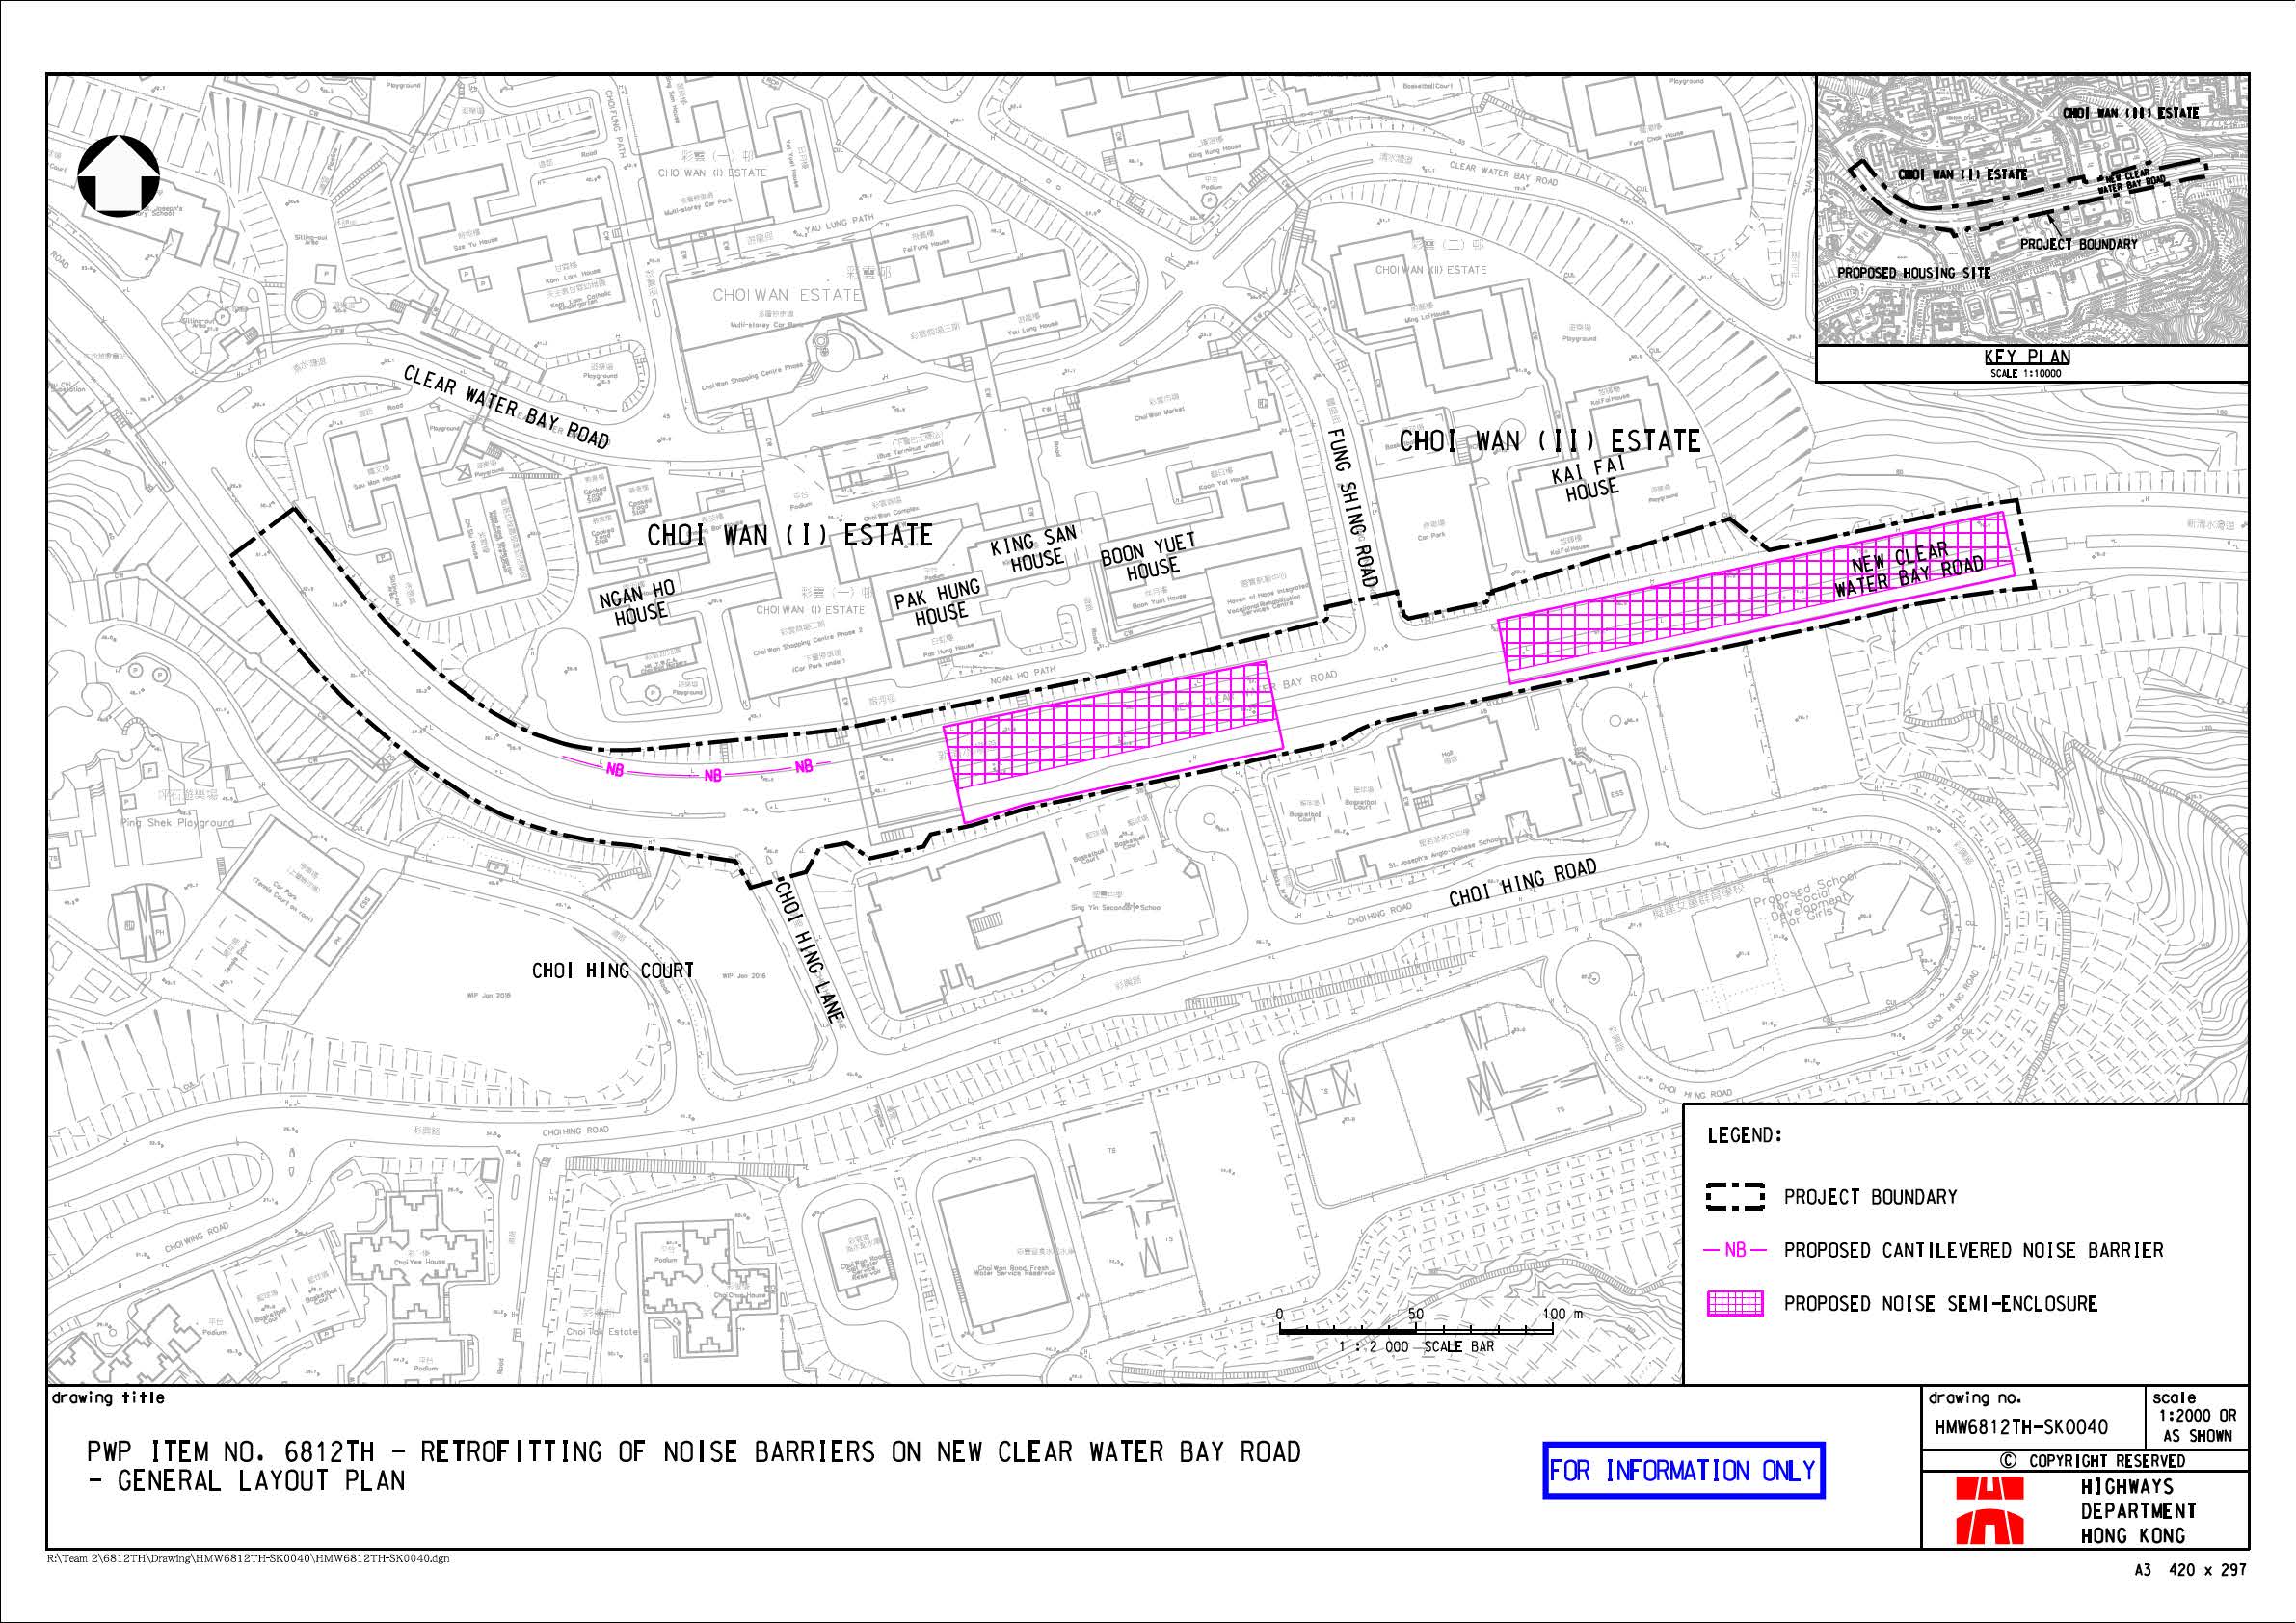 Layout Plan of Retrofitting of Noise Barriers on New Clear Water Bay Road